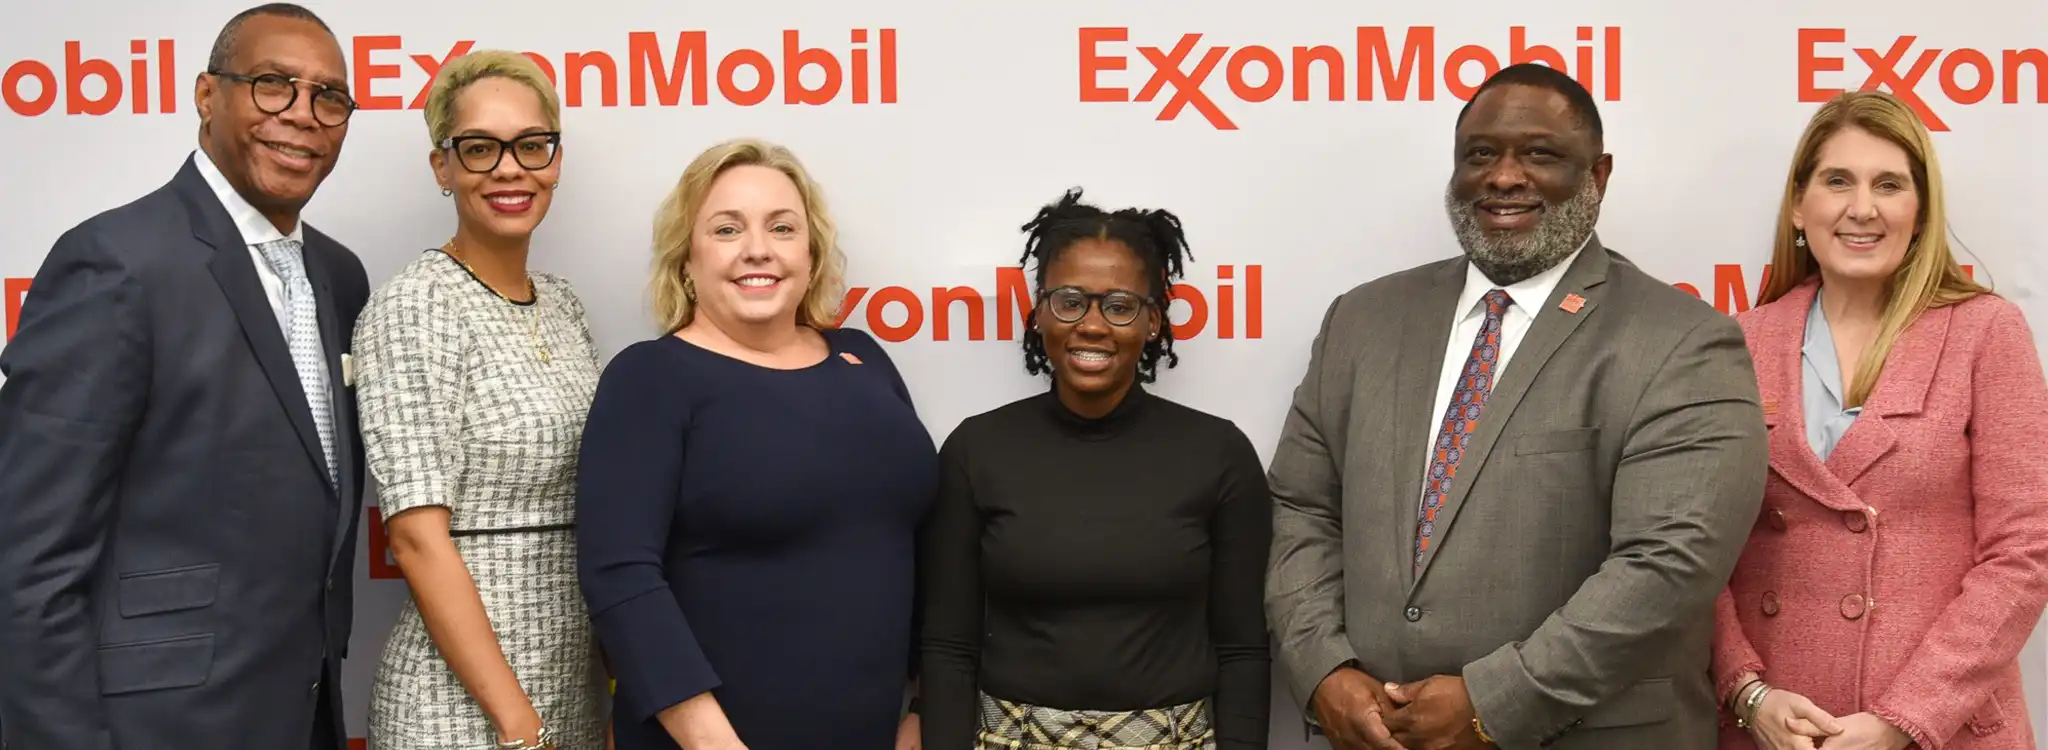 ExxonMobil Baton Rouge presented a $3,000 scholarship to future Baton Rouge Community College student Skylar Cotton. Pictured (l to r) are BRCC administrators and Cotton: Process Technology Administrator Benjamin Stove, Interim Assistant Vice Chancellor for Academic and Workforce Brandy Tyson, Ph.D., Provost/Vice Chancellor for Workforce and Student Development, Skylar Cotton, BRCC Chancellor Willie E. Smith, Ph.D. and BRCC Vice Chancellor for Institutional Advancement Pilar Blanco Eble, Ed.D.